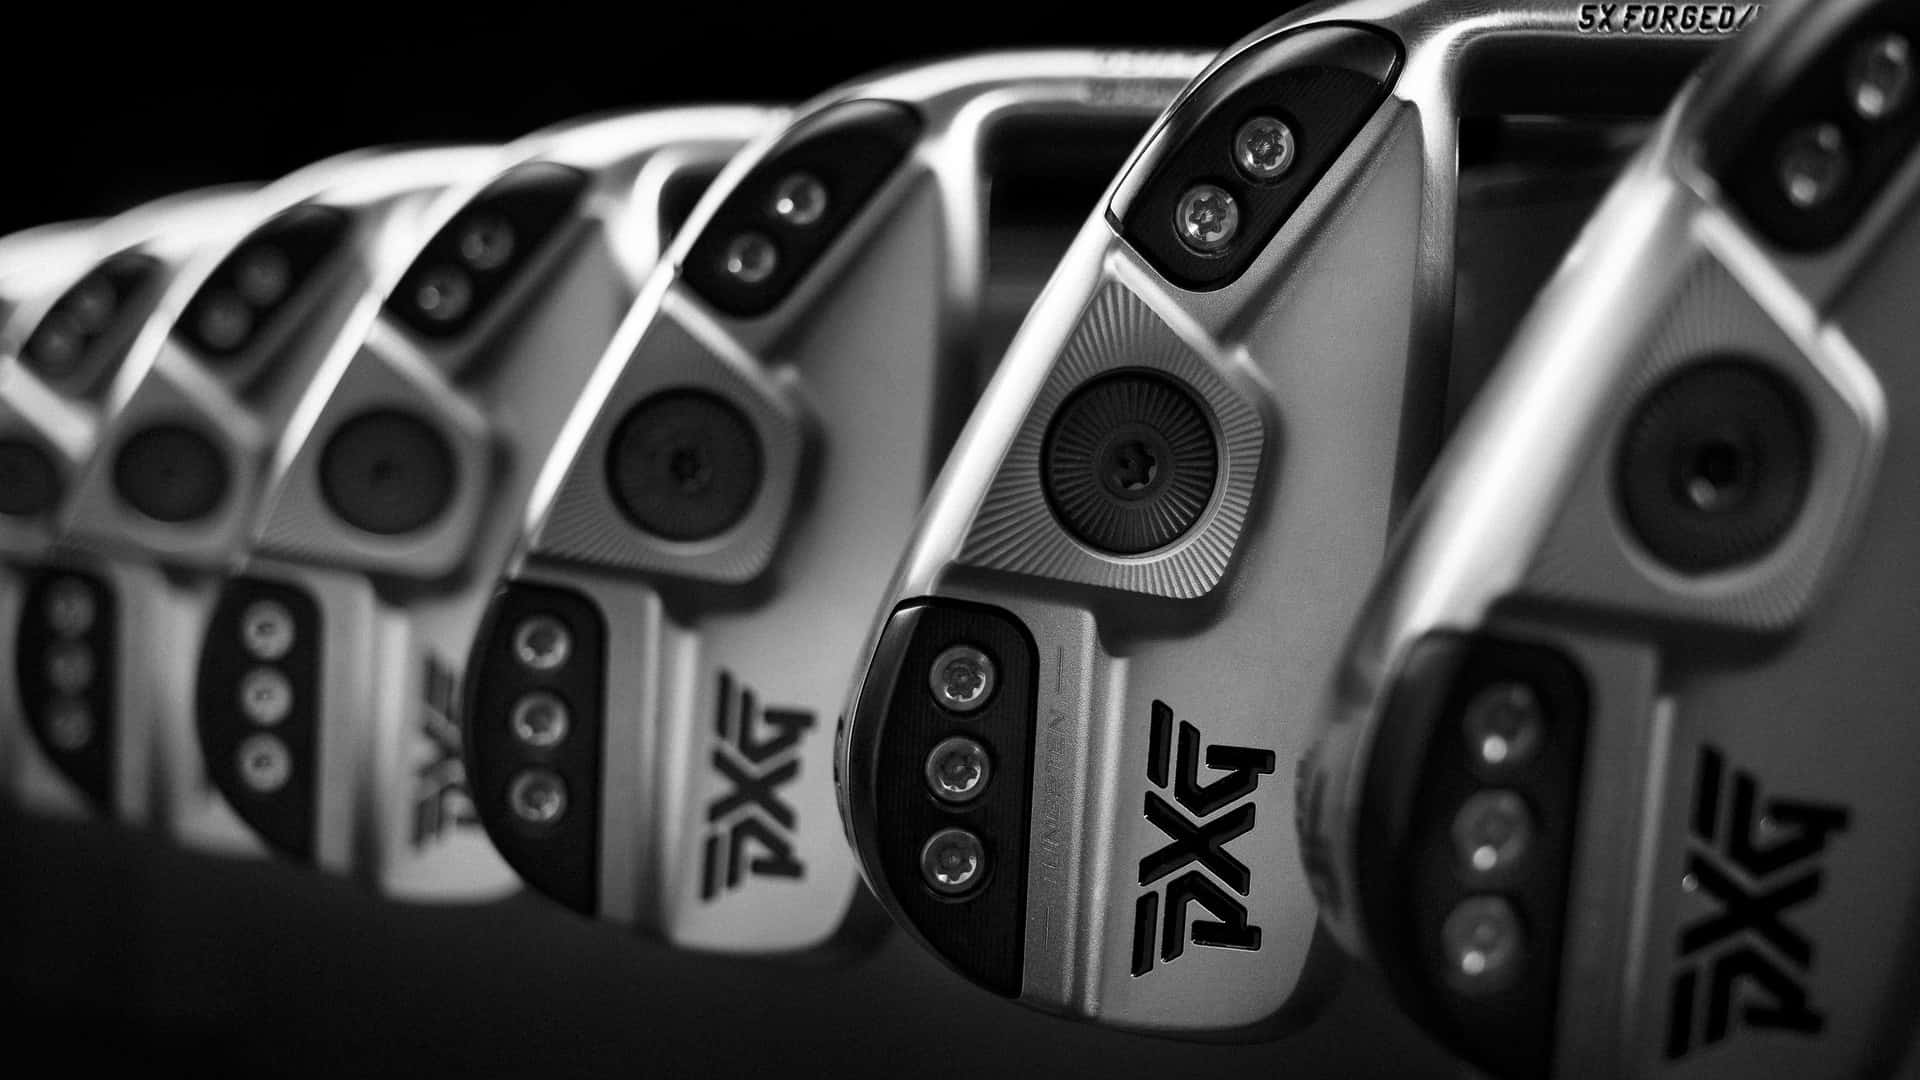 PXG Gen5 Vs Gen3 Irons: The Key Differences And Which To Buy? - PXG